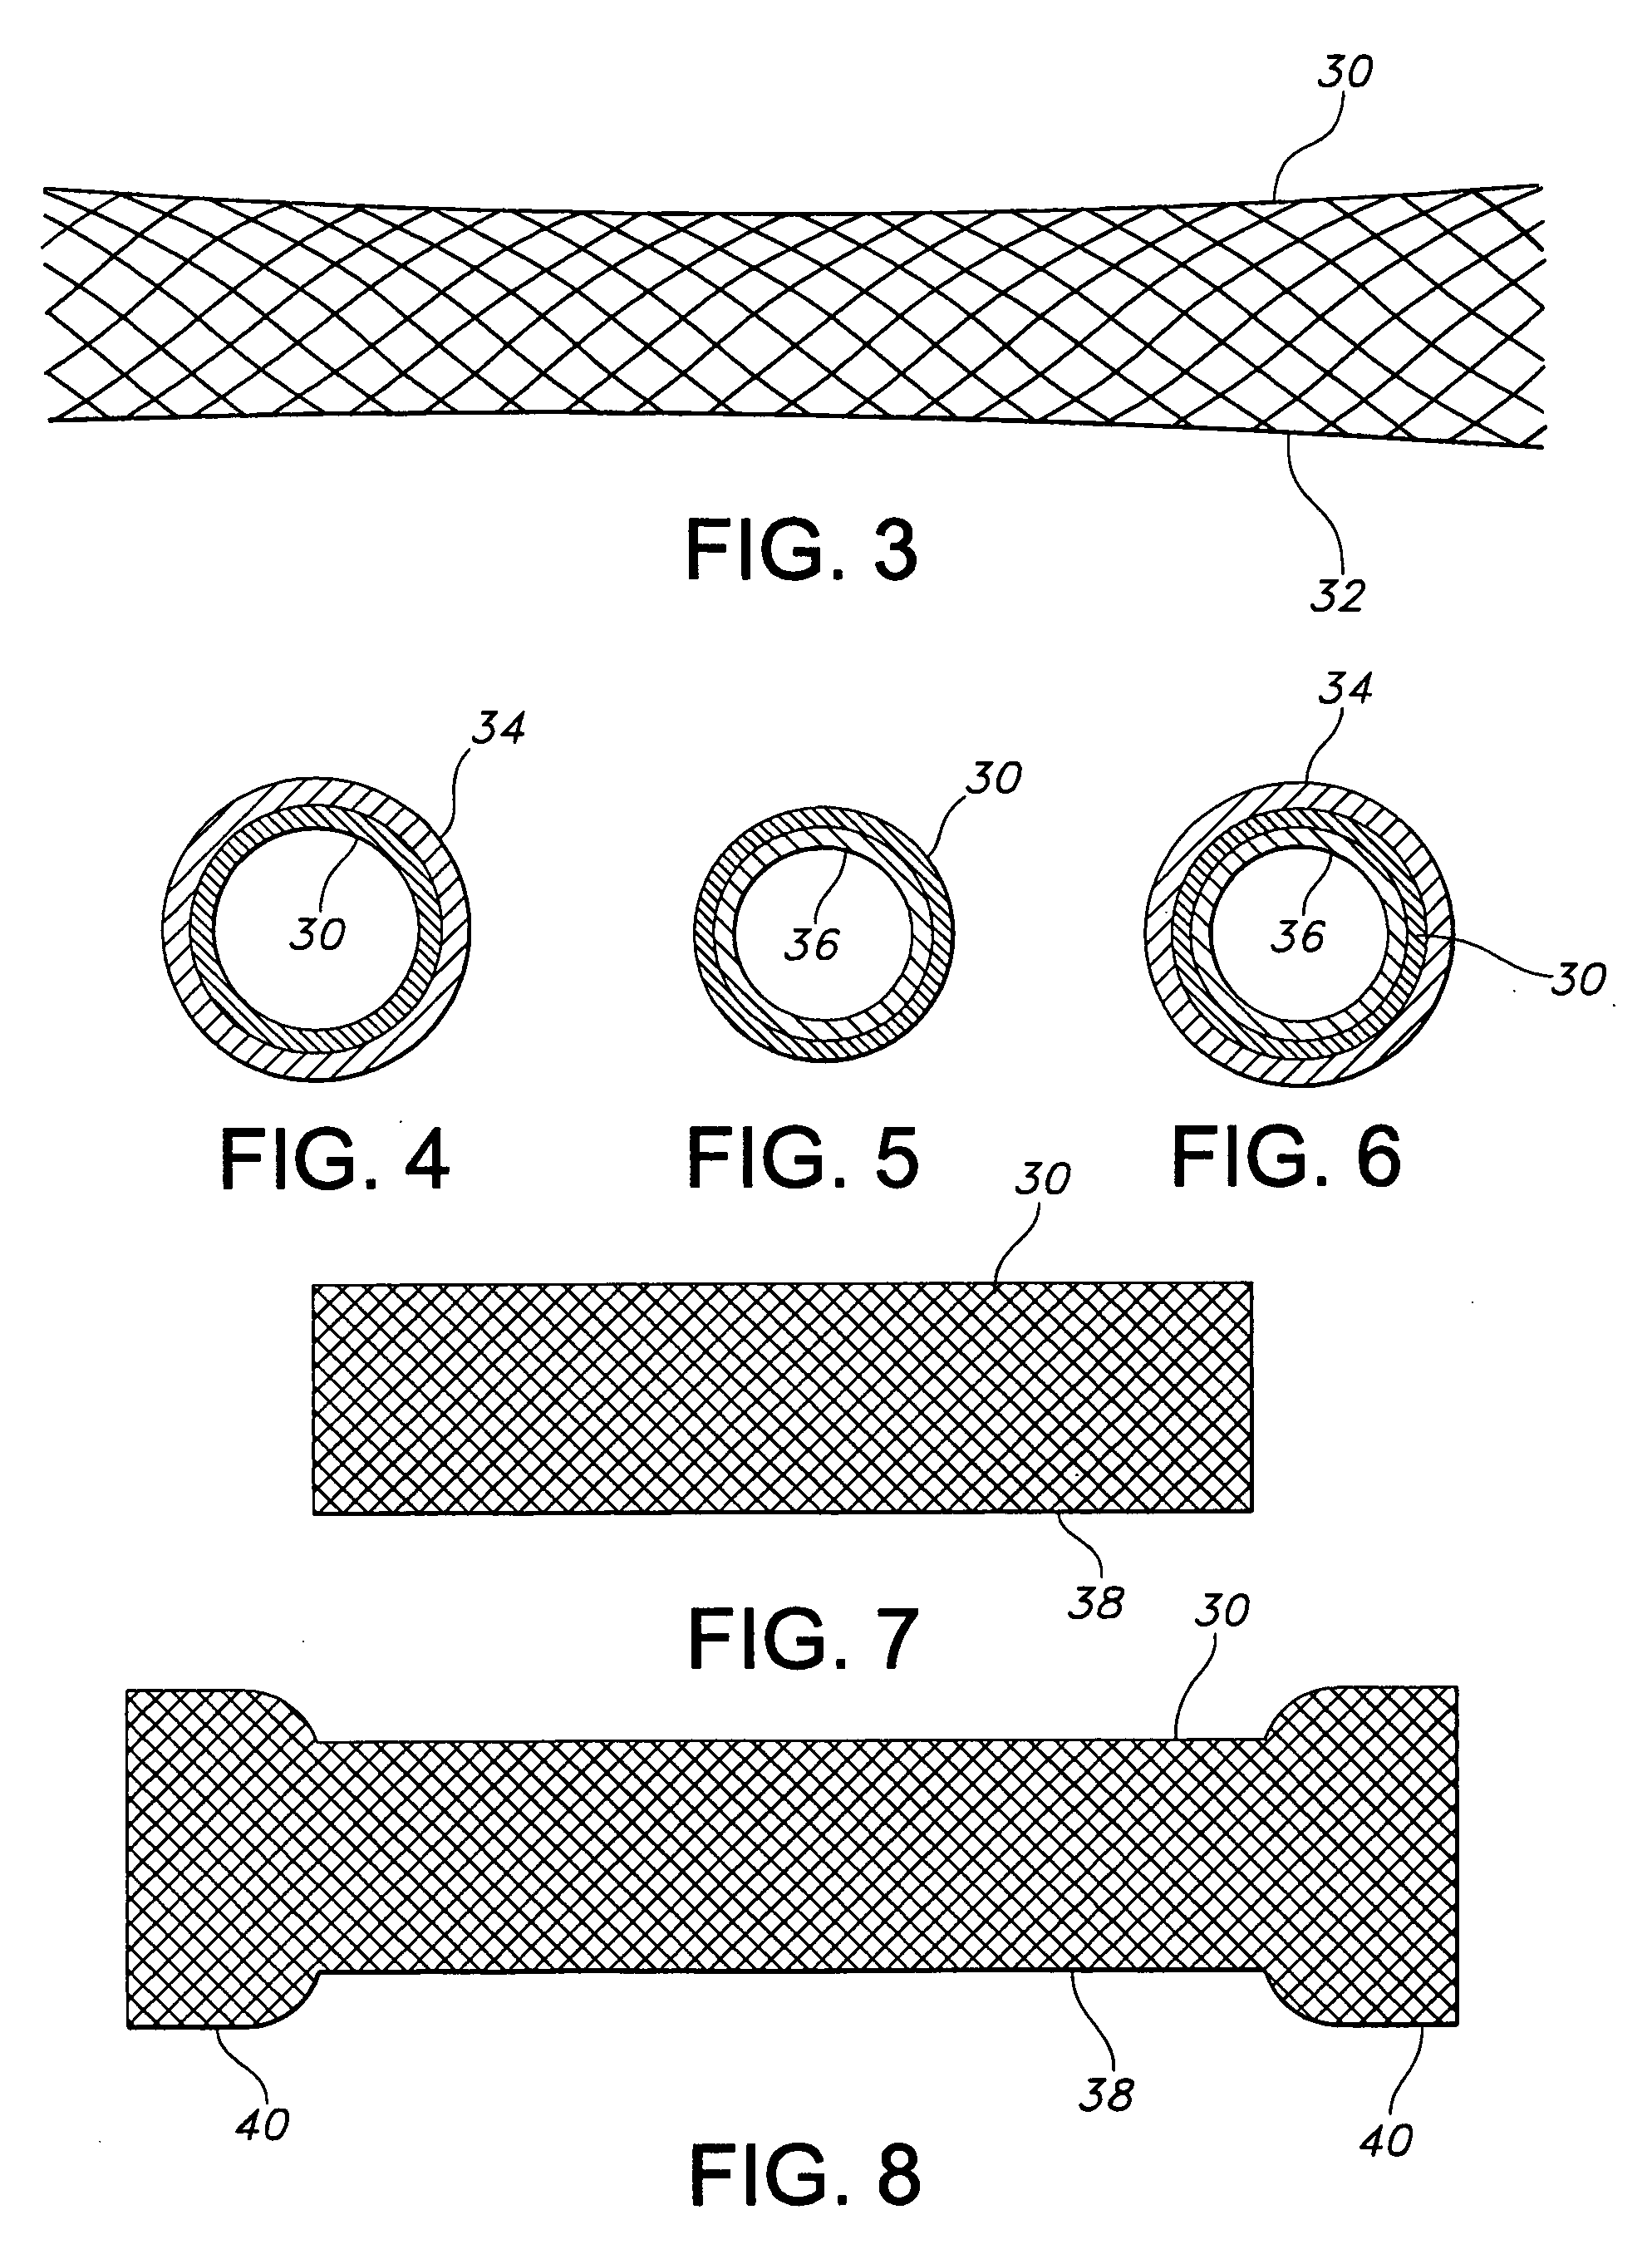 Apparatus and method for loading and delivering a stent